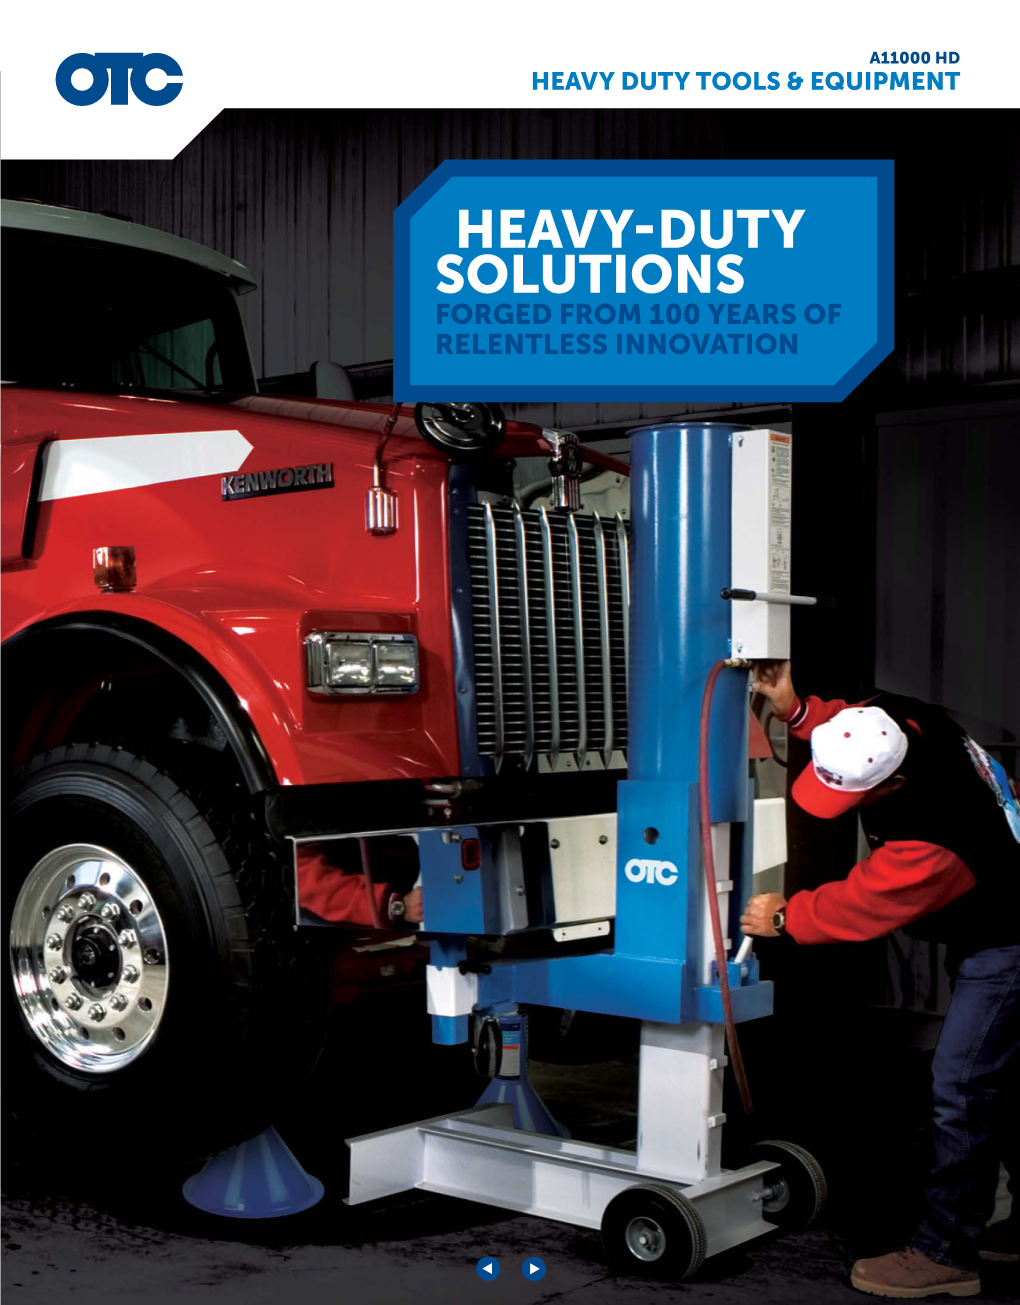 Heavy-Duty Solutions Forged from 100 Years of Relentless Innovation